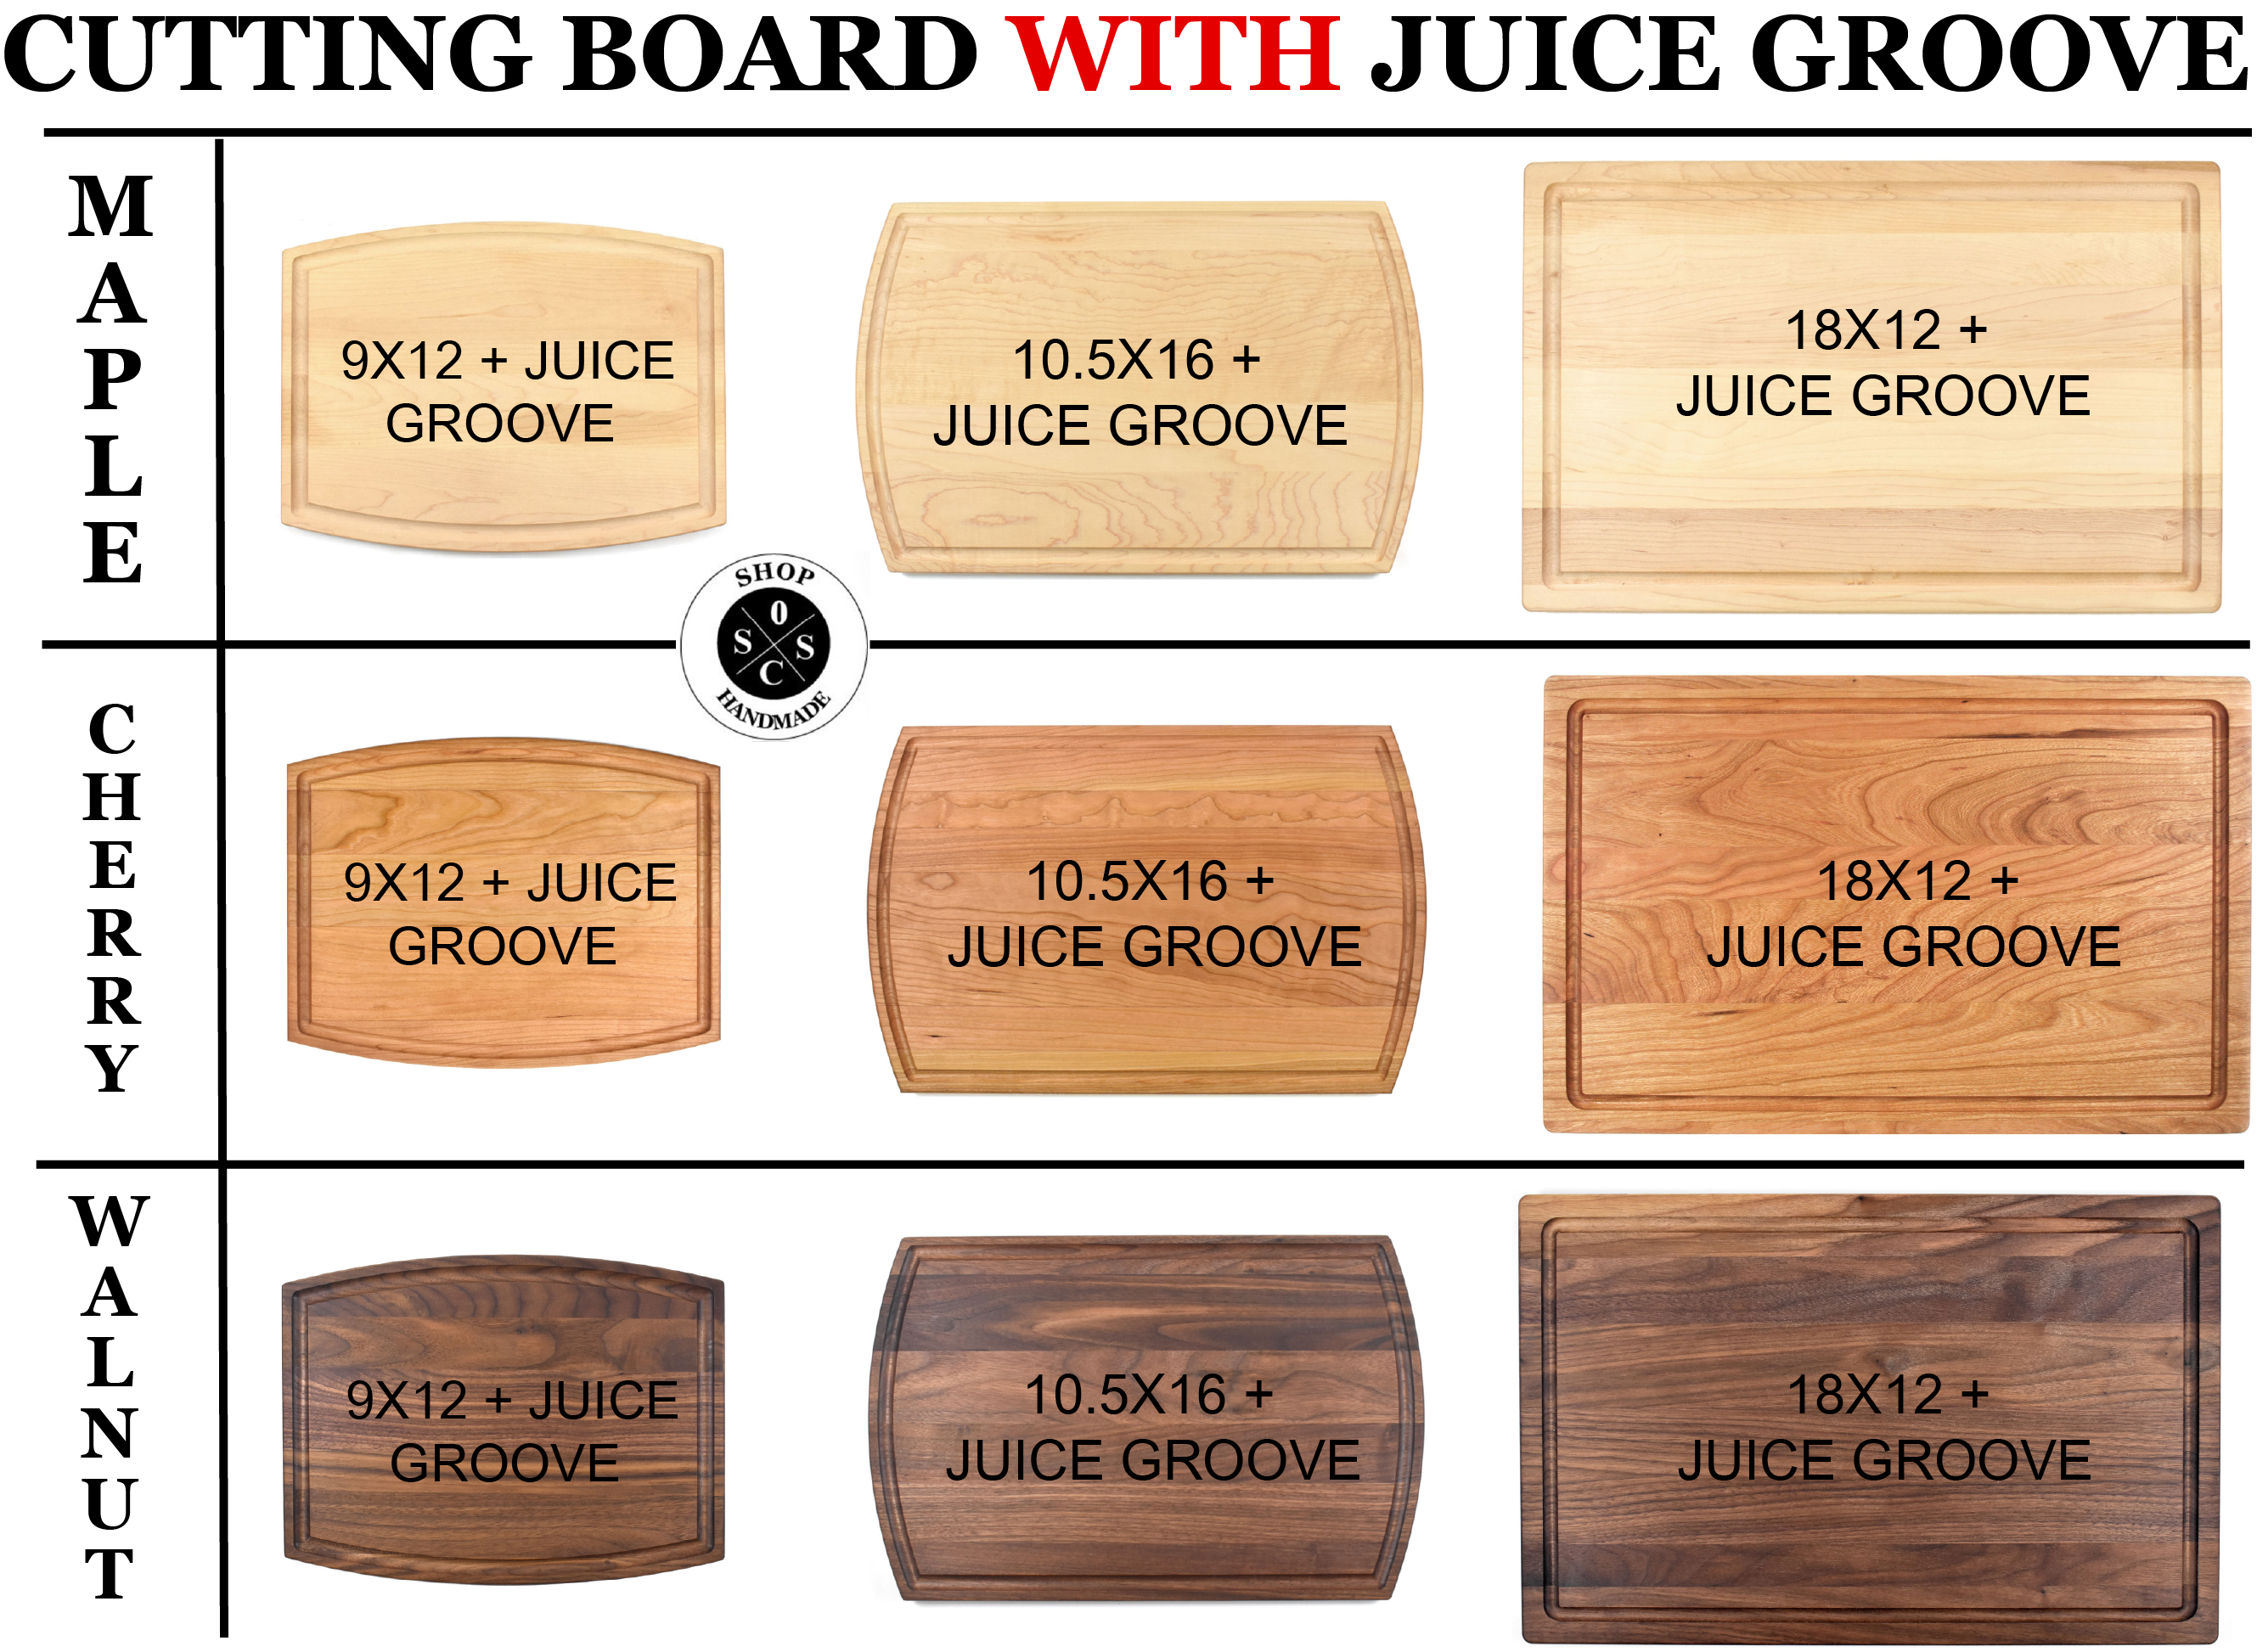 Personalized Cutting Board - Engraved Cutting Board, Custom Cutting Board, Wedding Gift, Closing Gift. Housewarming Gift, Anniversary Gift